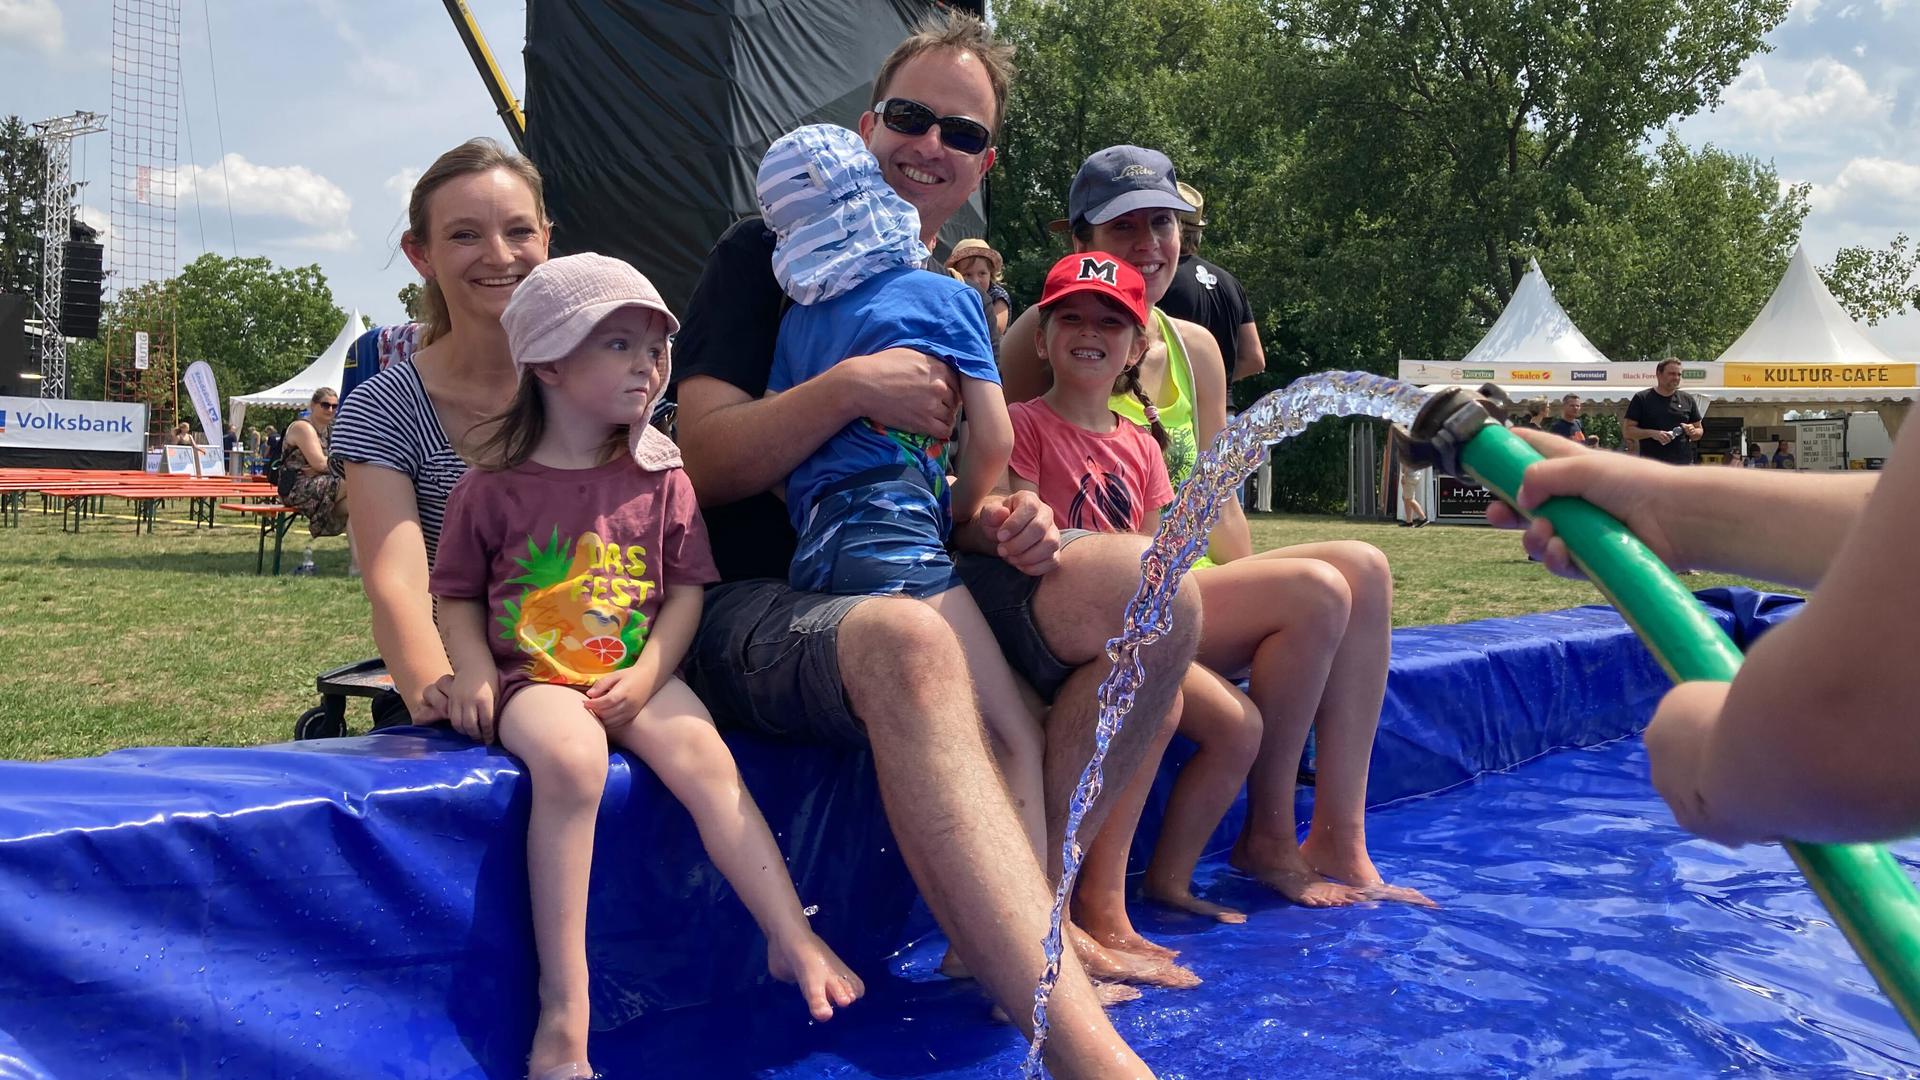 Feet in the water: The Wonneberger family cools off in the pool at the Mobi exhibition area. 